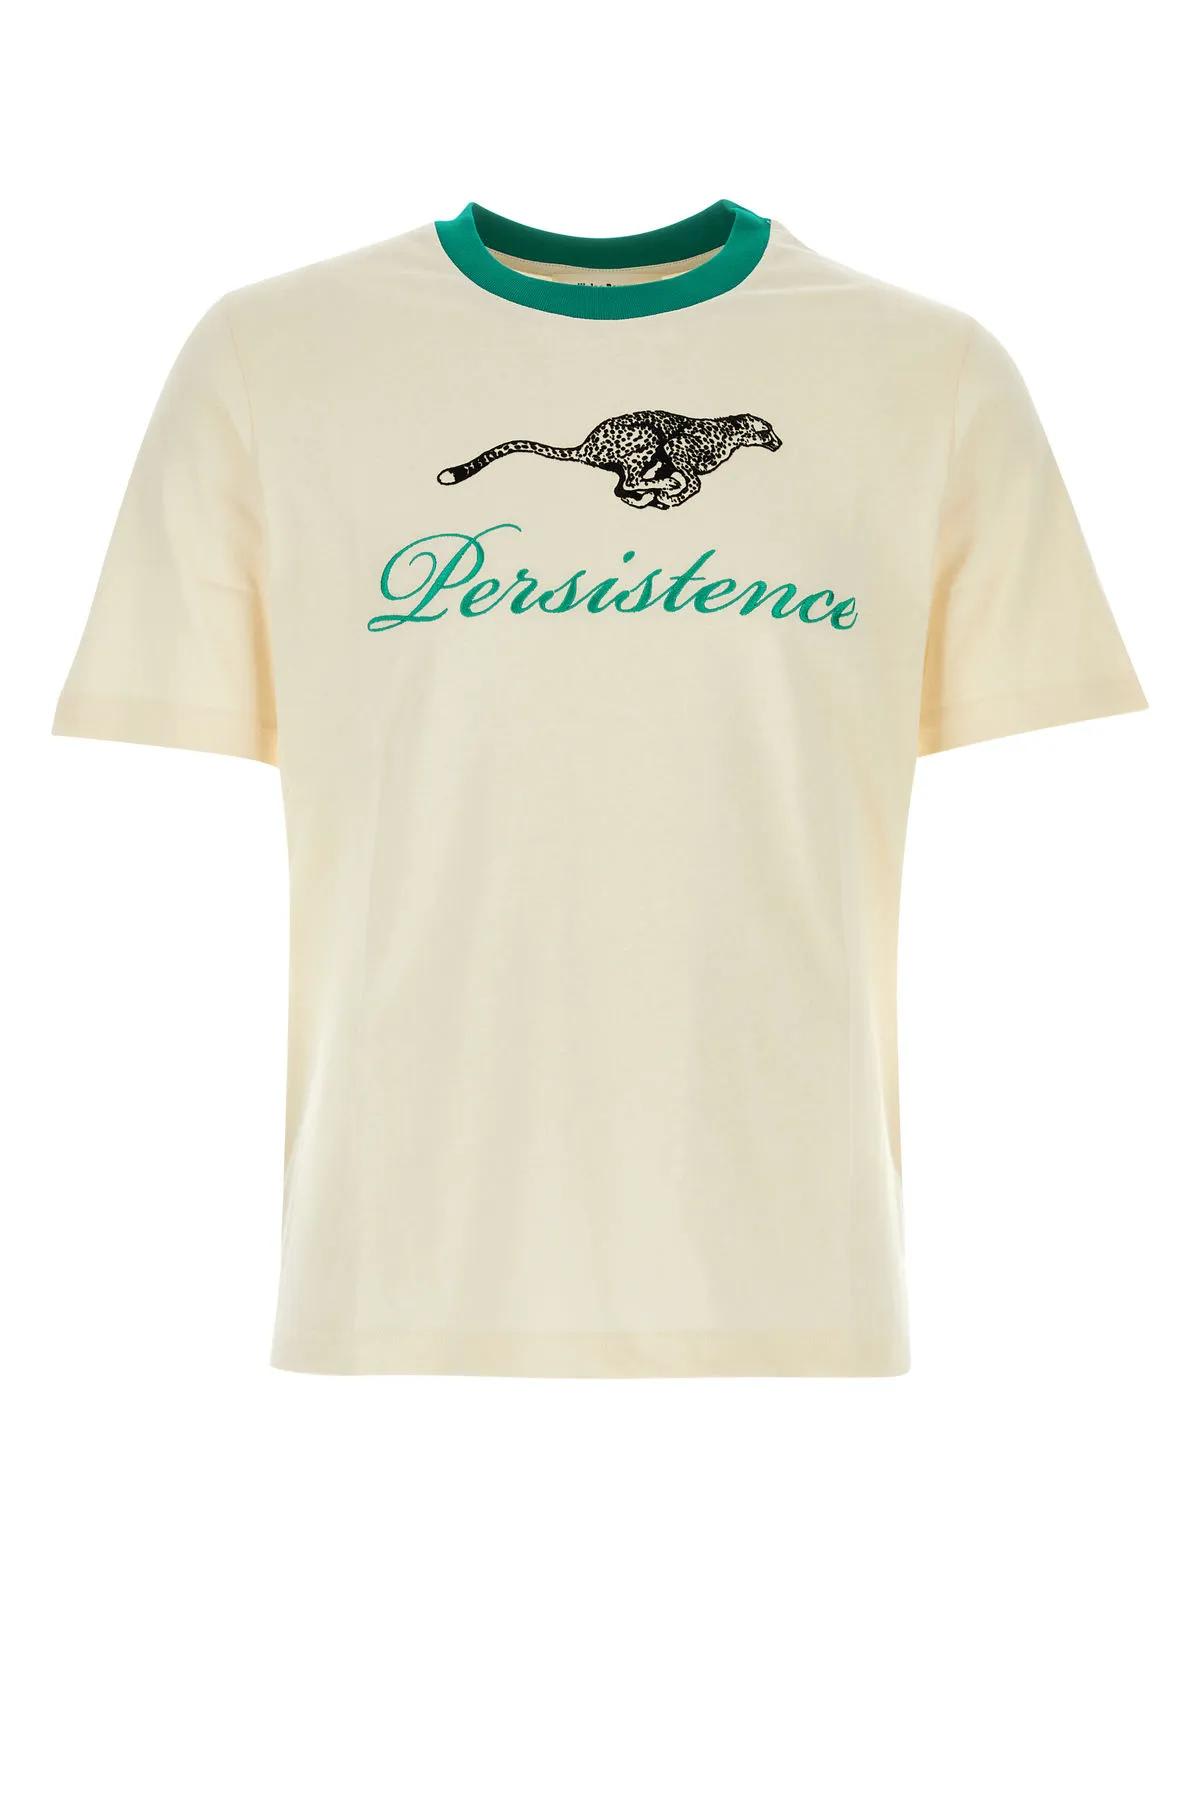 Shop Wales Bonner Cream Cotton Resilience T-shirt In White